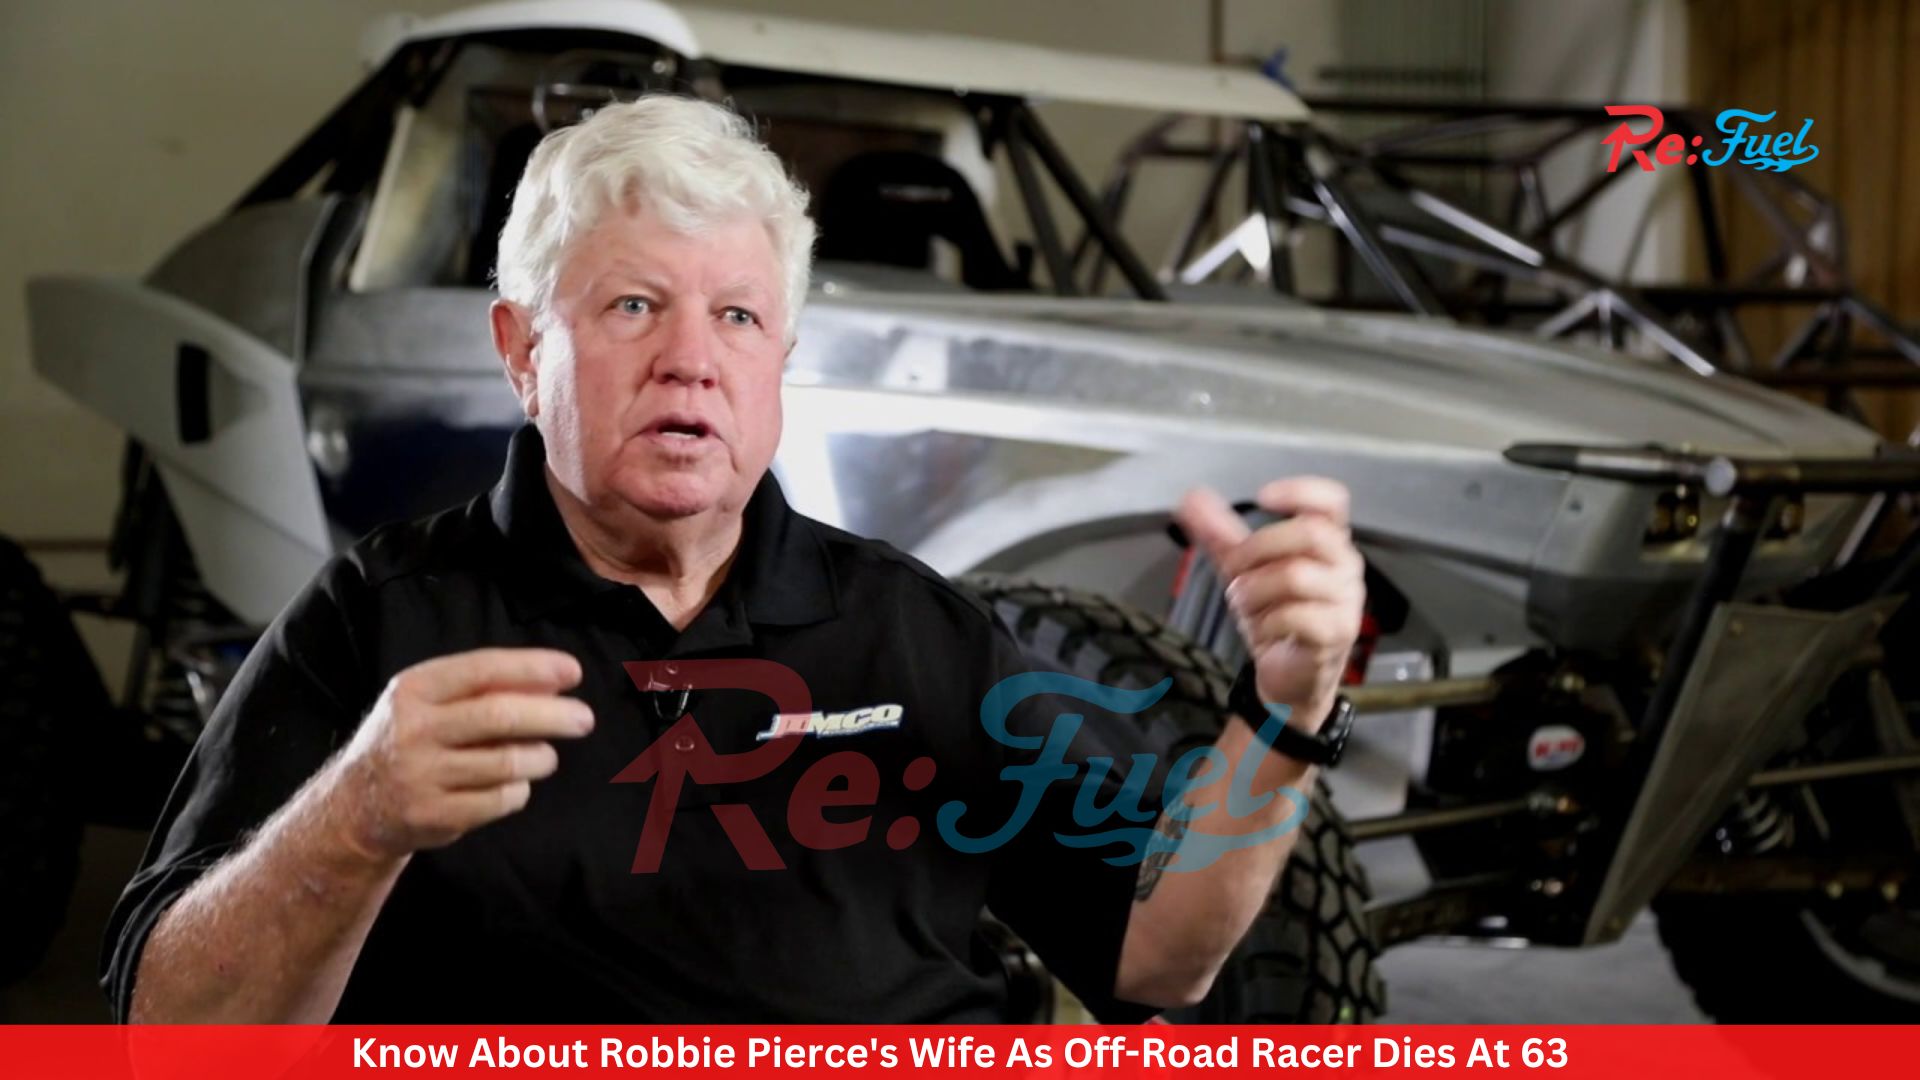 Know About Robbie Pierce's Wife As Off-Road Racer Dies At 63